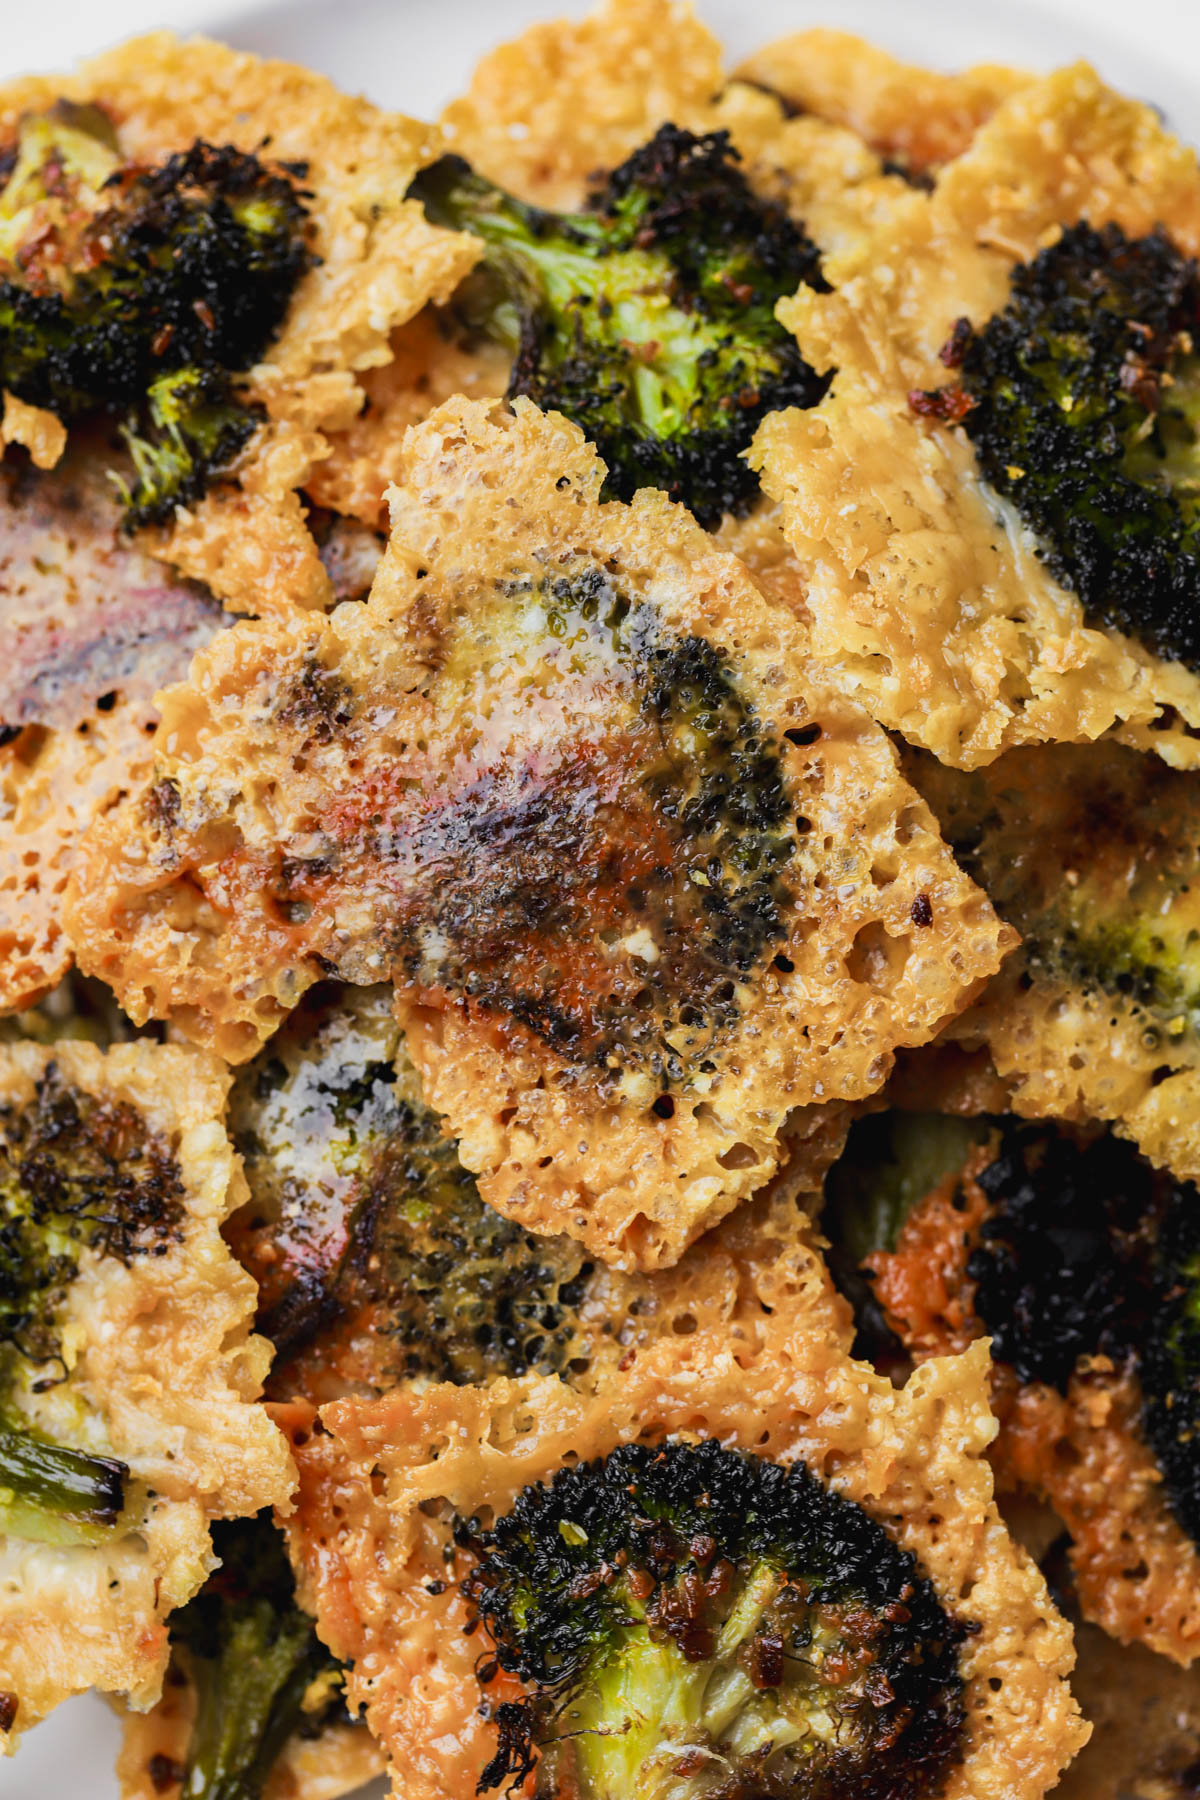 Broccoli with baked parmesan. 